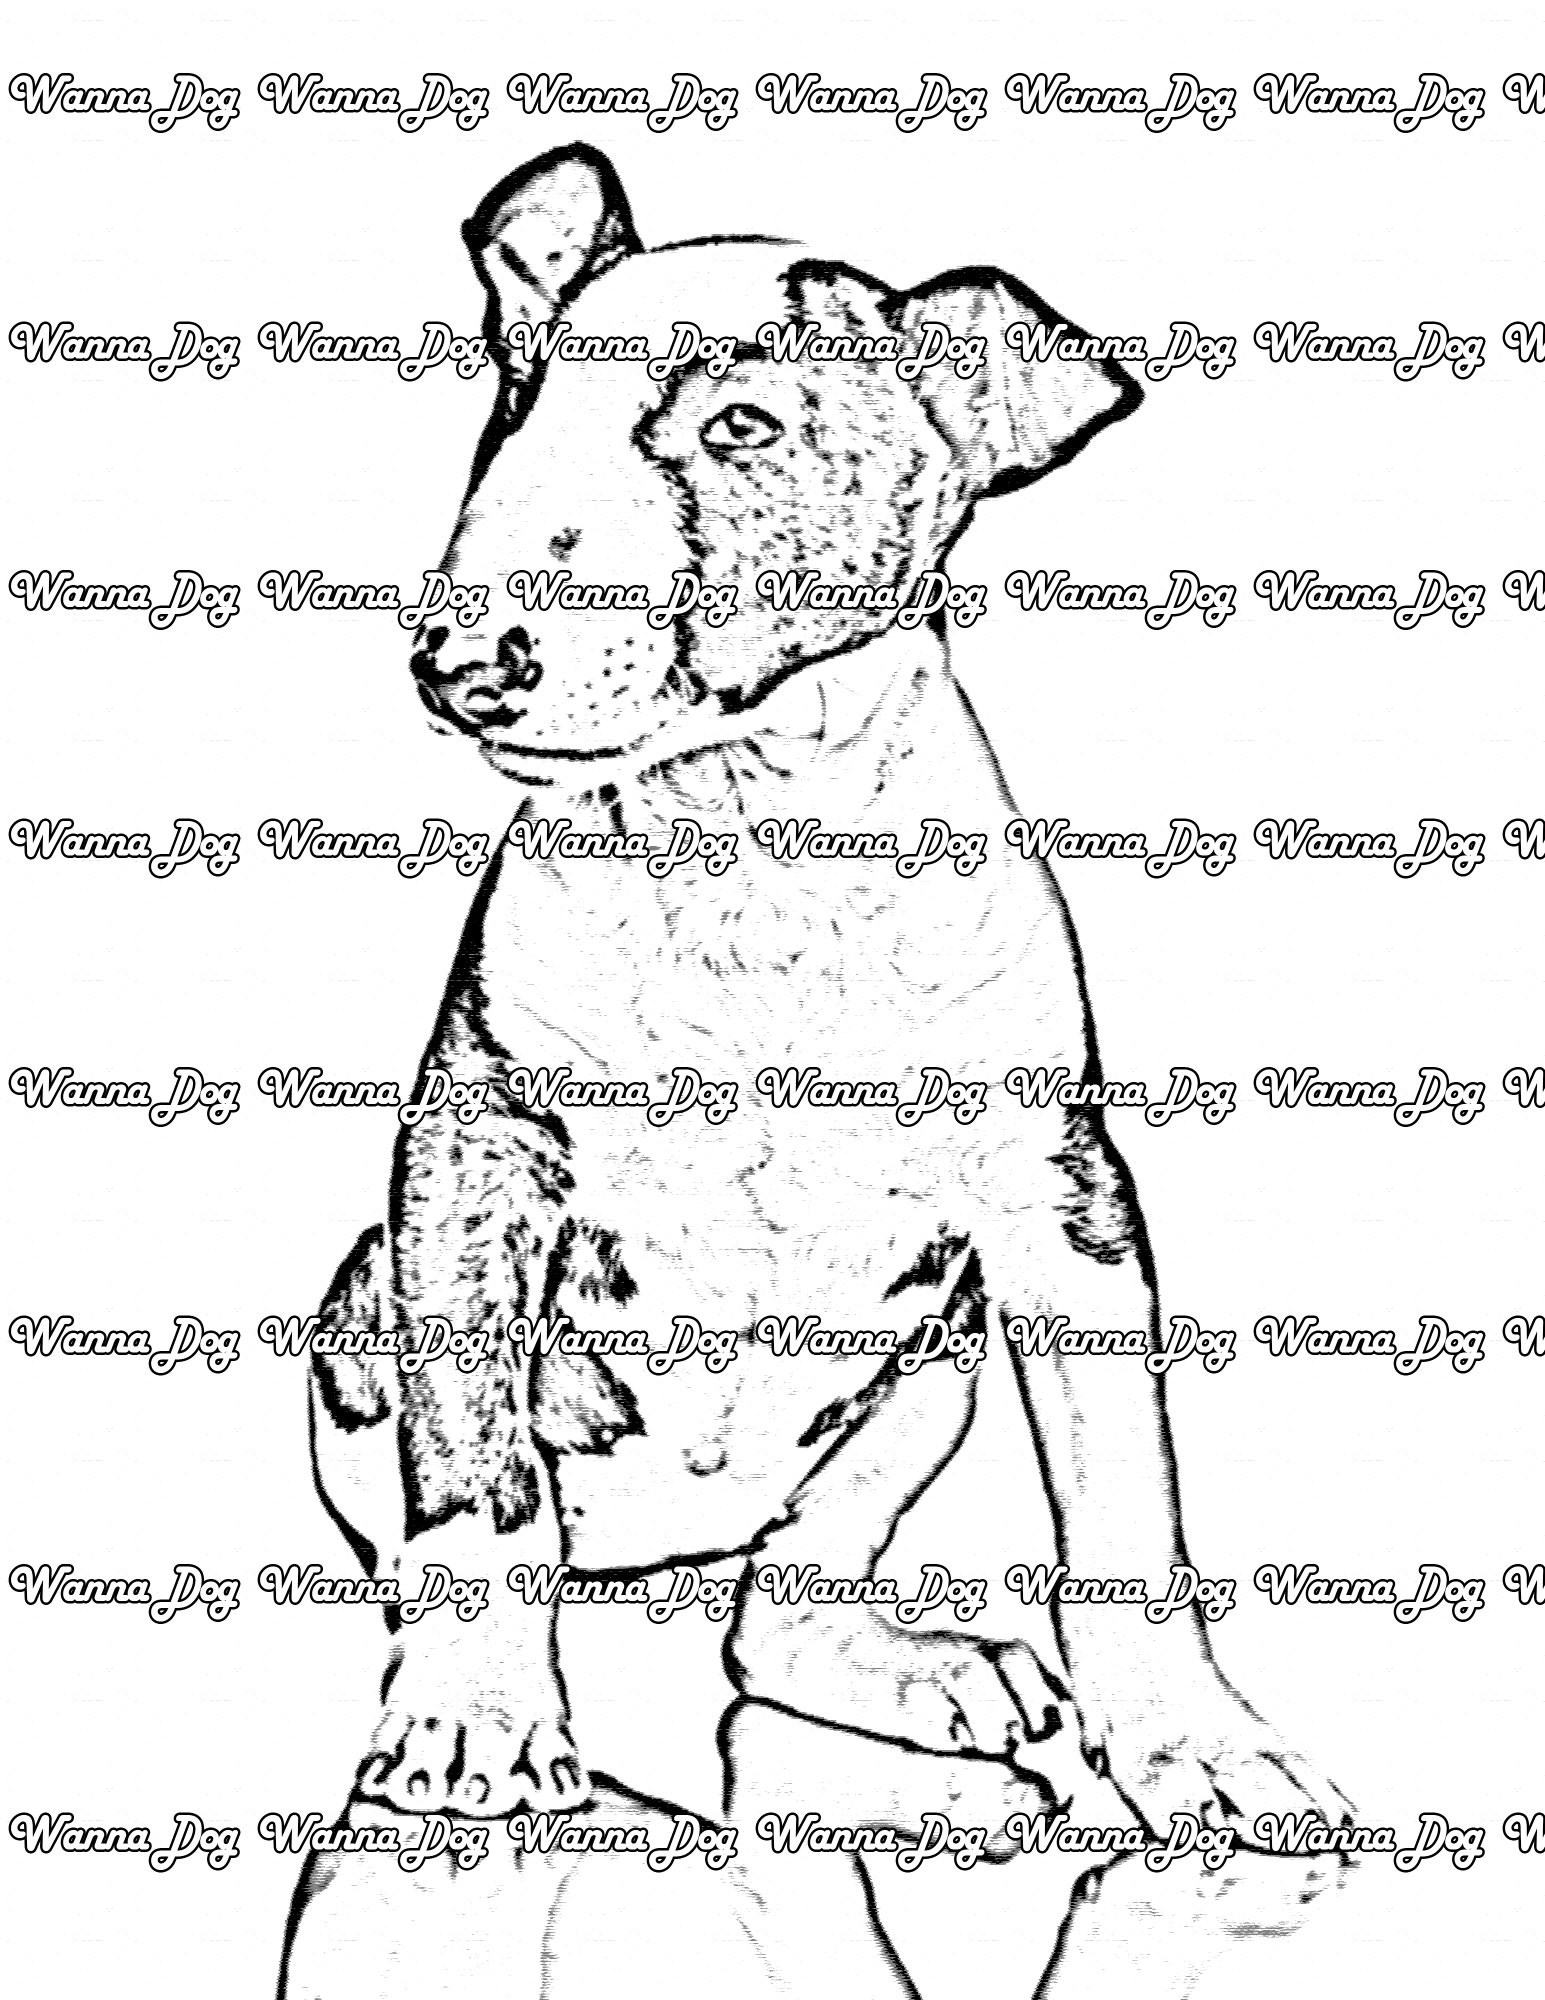 Bull Terrier Coloring Page of a Bull Terrier sitting and looking away from the camera